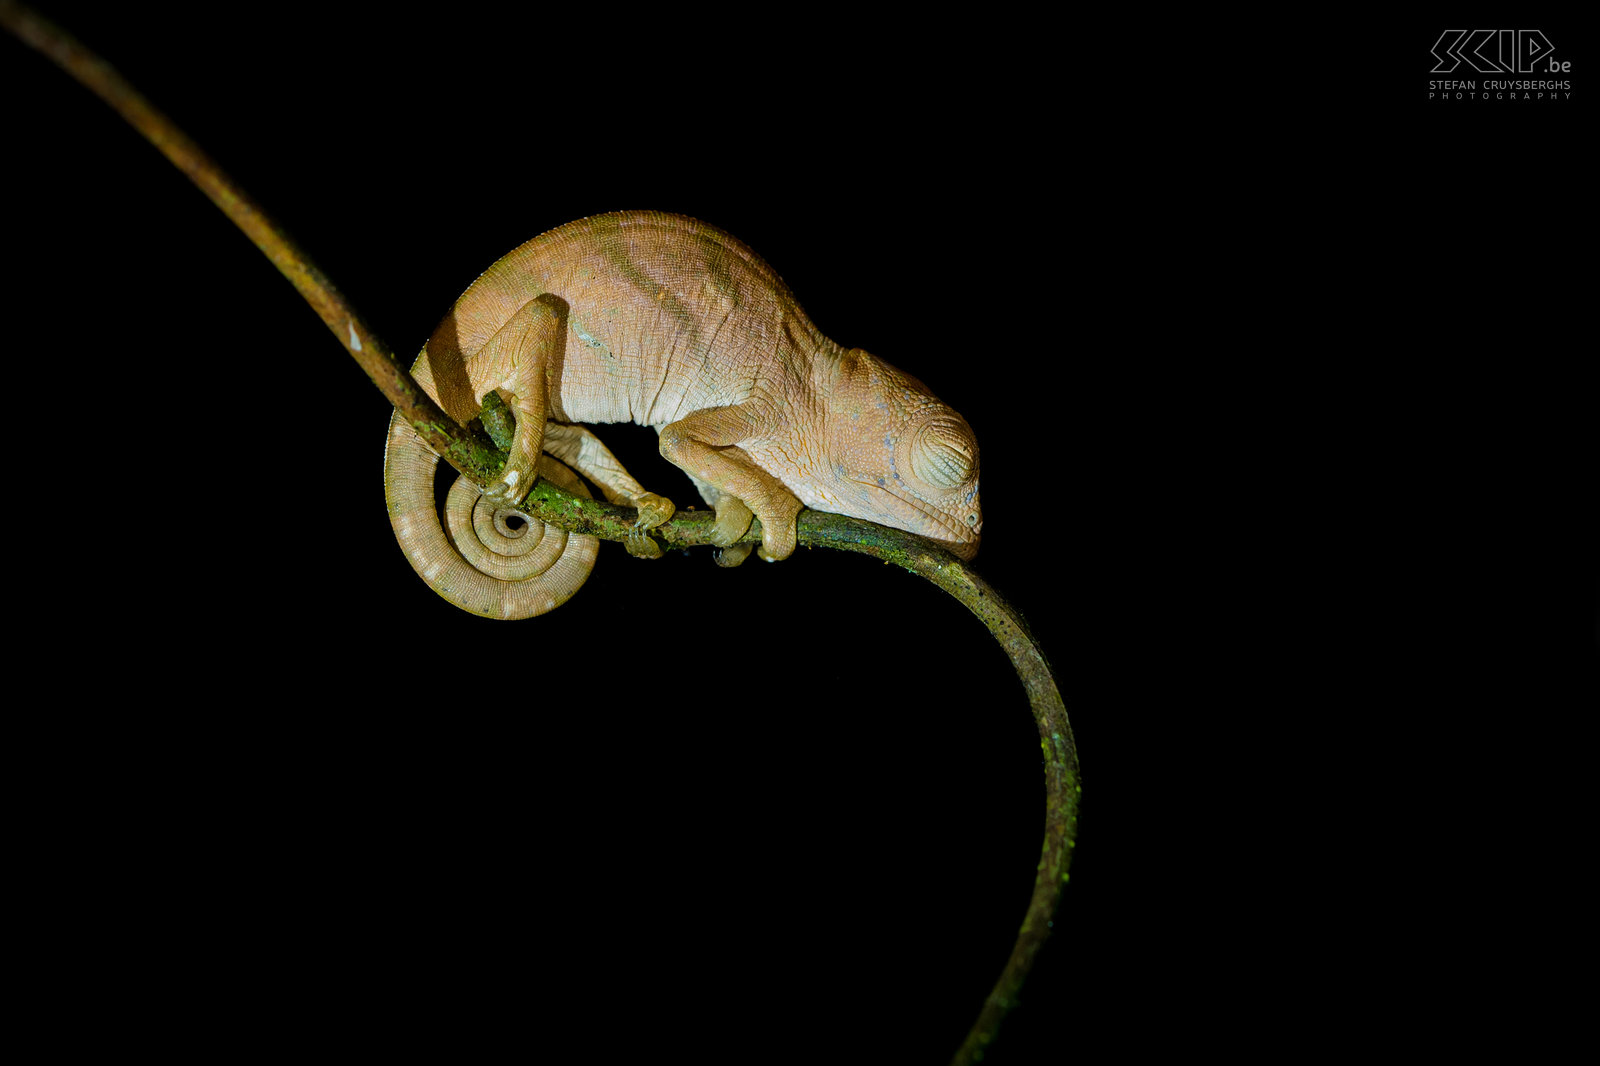 Andasibe - Baby Parson's chameleon A baby Parson’s chameleon sleeping on a branch in the VOI private reserve near Andasibe national park. Stefan Cruysberghs